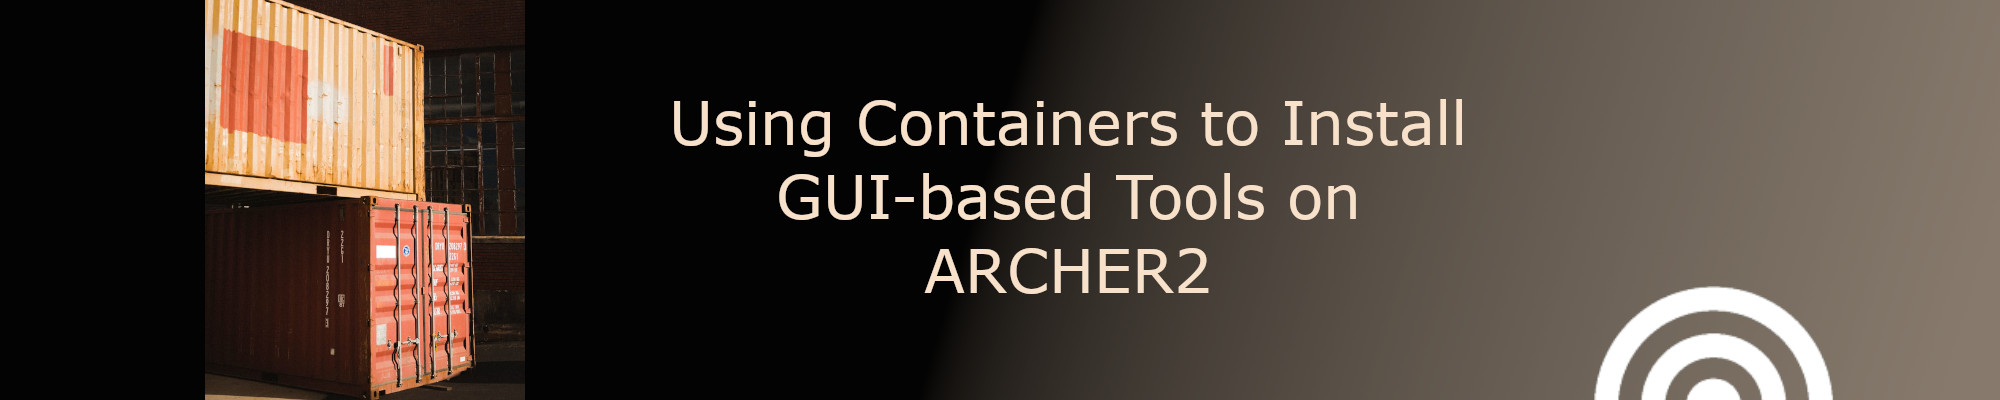 Using Containers to Install GUI-based Tools on ARCHER2 blog post